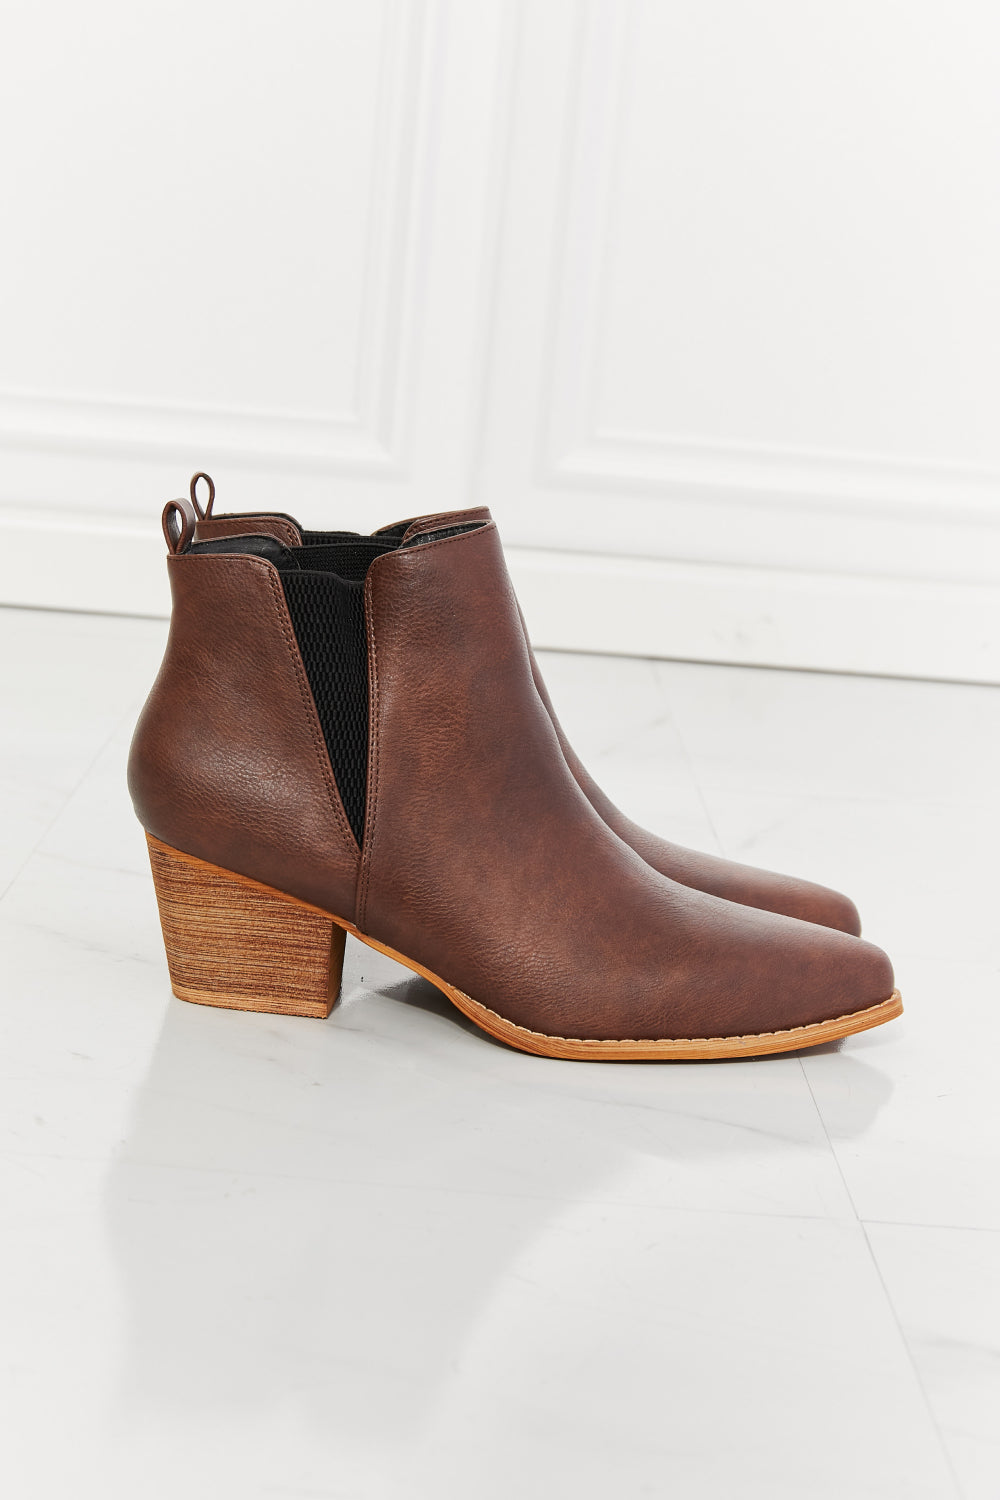 MMShoes Back At It Point Toe Bootie in Chocolate - Tigbul's Fashion